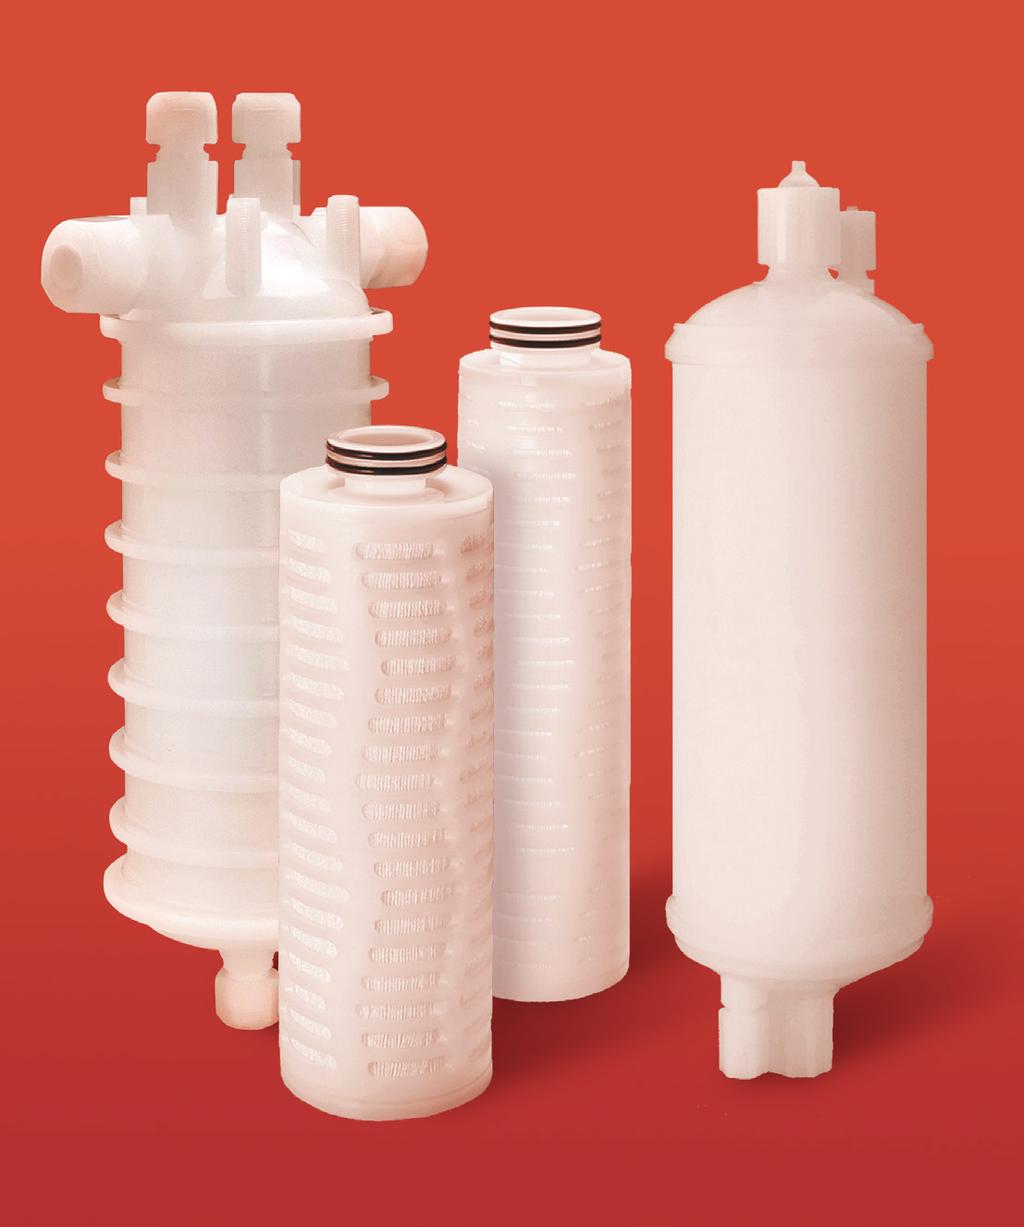 MICROCONTAMINATION CONTROL Intercept Liquid Filters Advanced dual-retention, liquid filtration for critical DHF/BOE cleaning applications Intercept liquid filters enable best-in-class filtration for